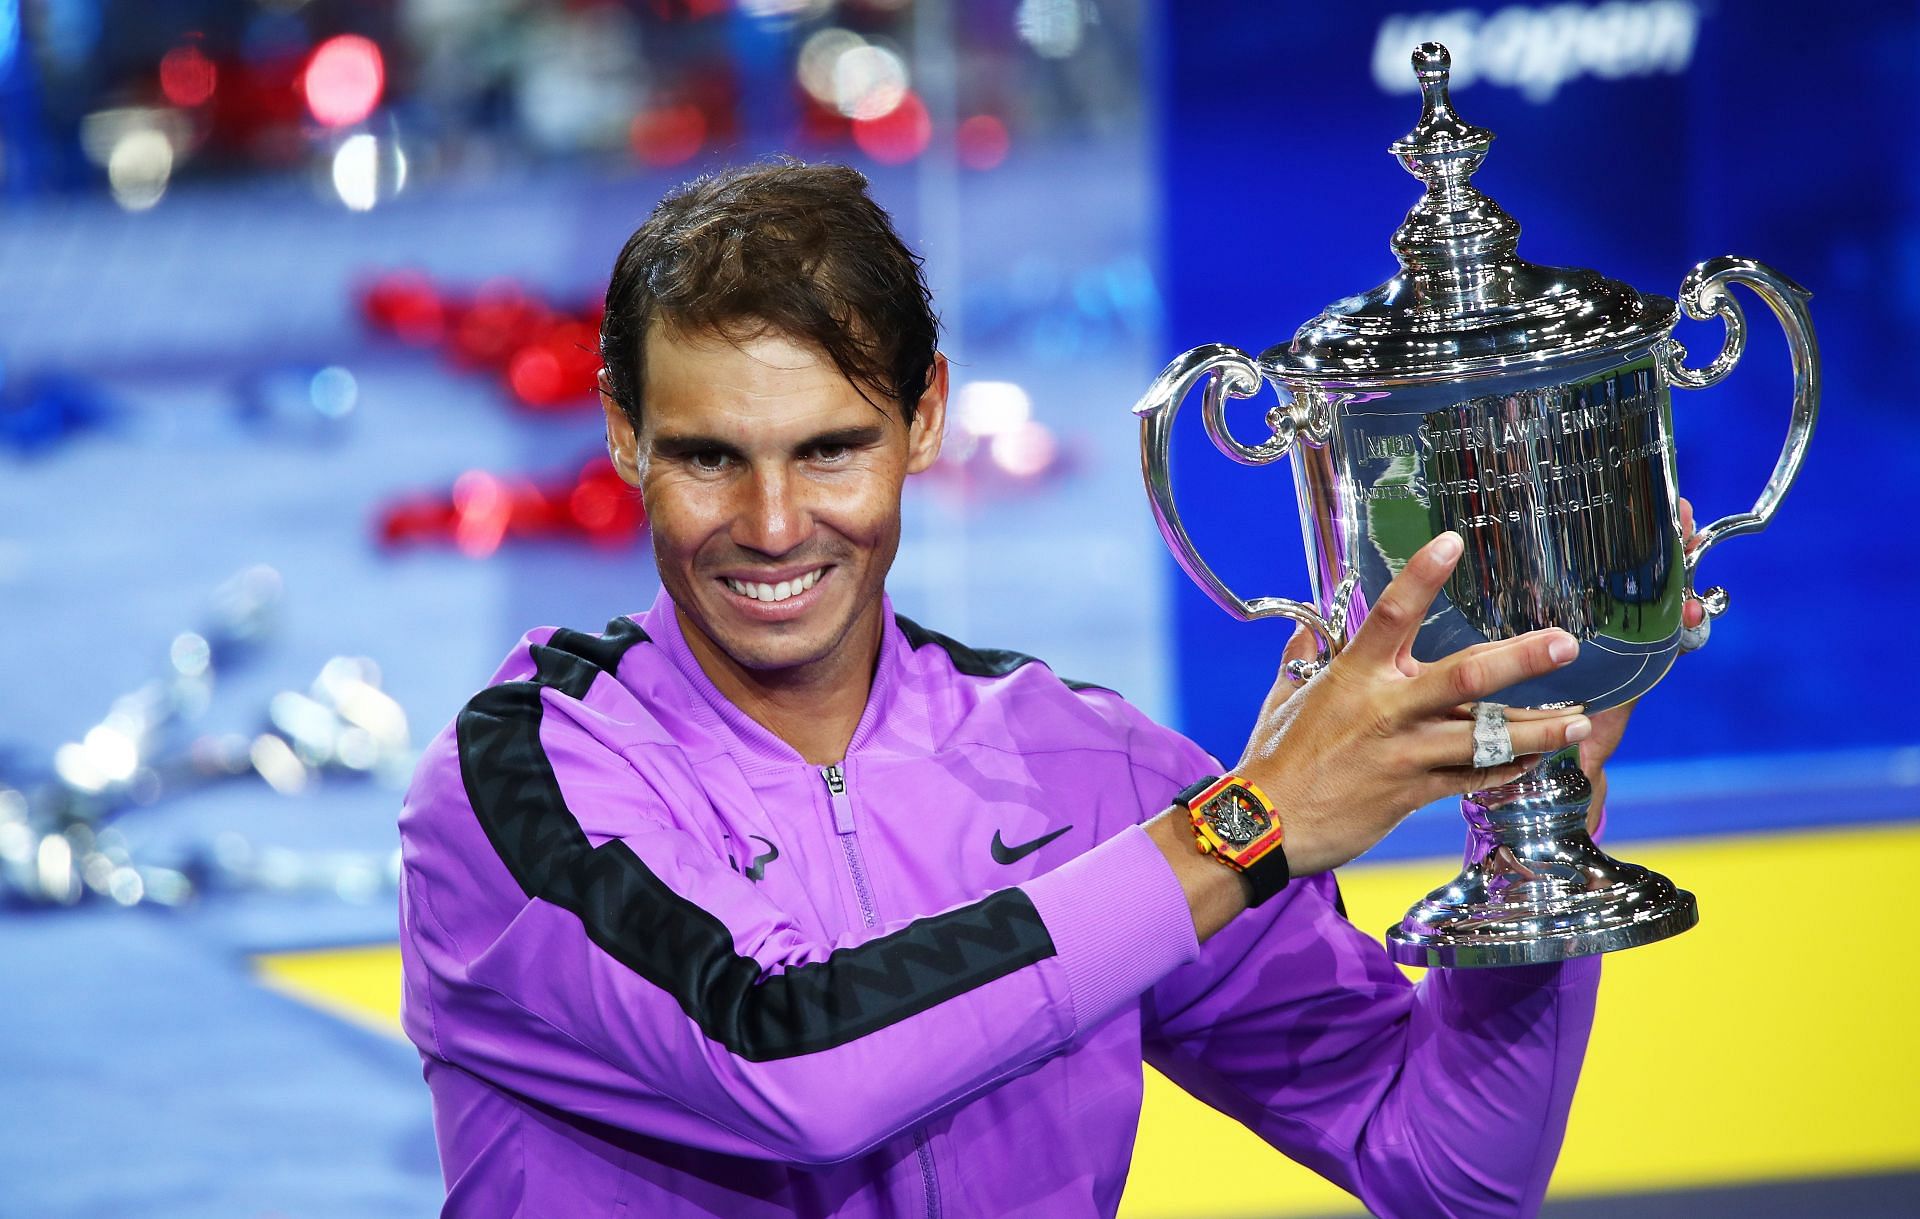 Rafael Nadal won his fourth US Open title in 2019.